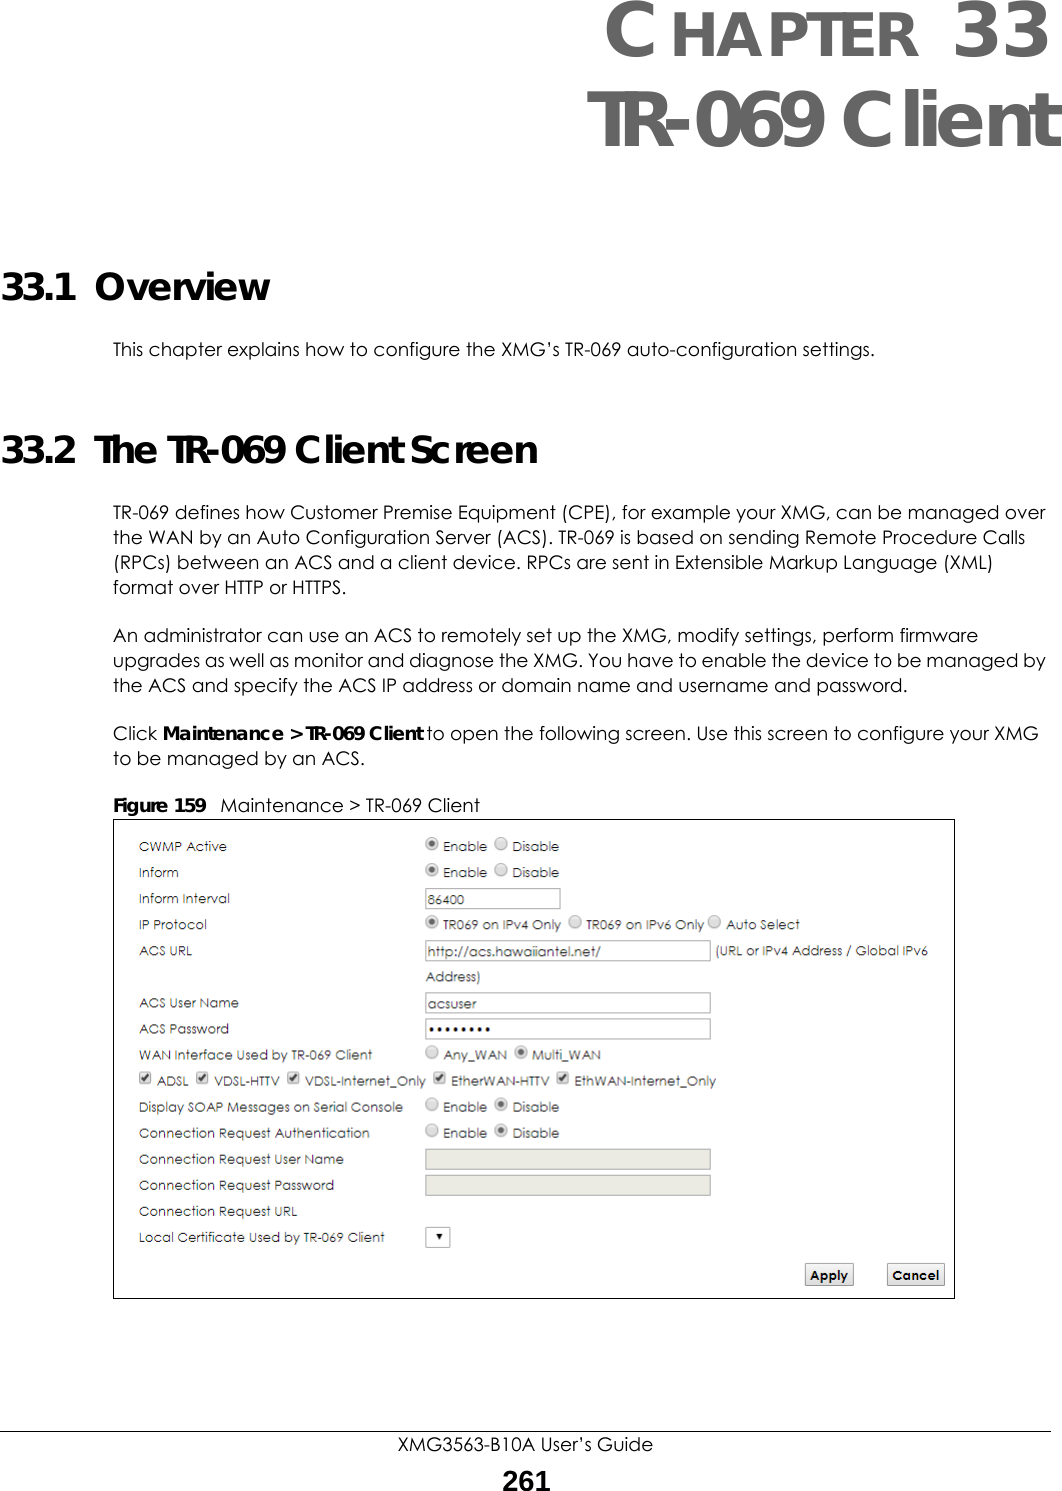 XMG3563-B10A User’s Guide261CHAPTER 33TR-069 Client33.1  OverviewThis chapter explains how to configure the XMG’s TR-069 auto-configuration settings.33.2  The TR-069 Client ScreenTR-069 defines how Customer Premise Equipment (CPE), for example your XMG, can be managed over the WAN by an Auto Configuration Server (ACS). TR-069 is based on sending Remote Procedure Calls (RPCs) between an ACS and a client device. RPCs are sent in Extensible Markup Language (XML) format over HTTP or HTTPS. An administrator can use an ACS to remotely set up the XMG, modify settings, perform firmware upgrades as well as monitor and diagnose the XMG. You have to enable the device to be managed by the ACS and specify the ACS IP address or domain name and username and password.Click Maintenance &gt; TR-069 Client to open the following screen. Use this screen to configure your XMG to be managed by an ACS. Figure 159   Maintenance &gt; TR-069 Client 